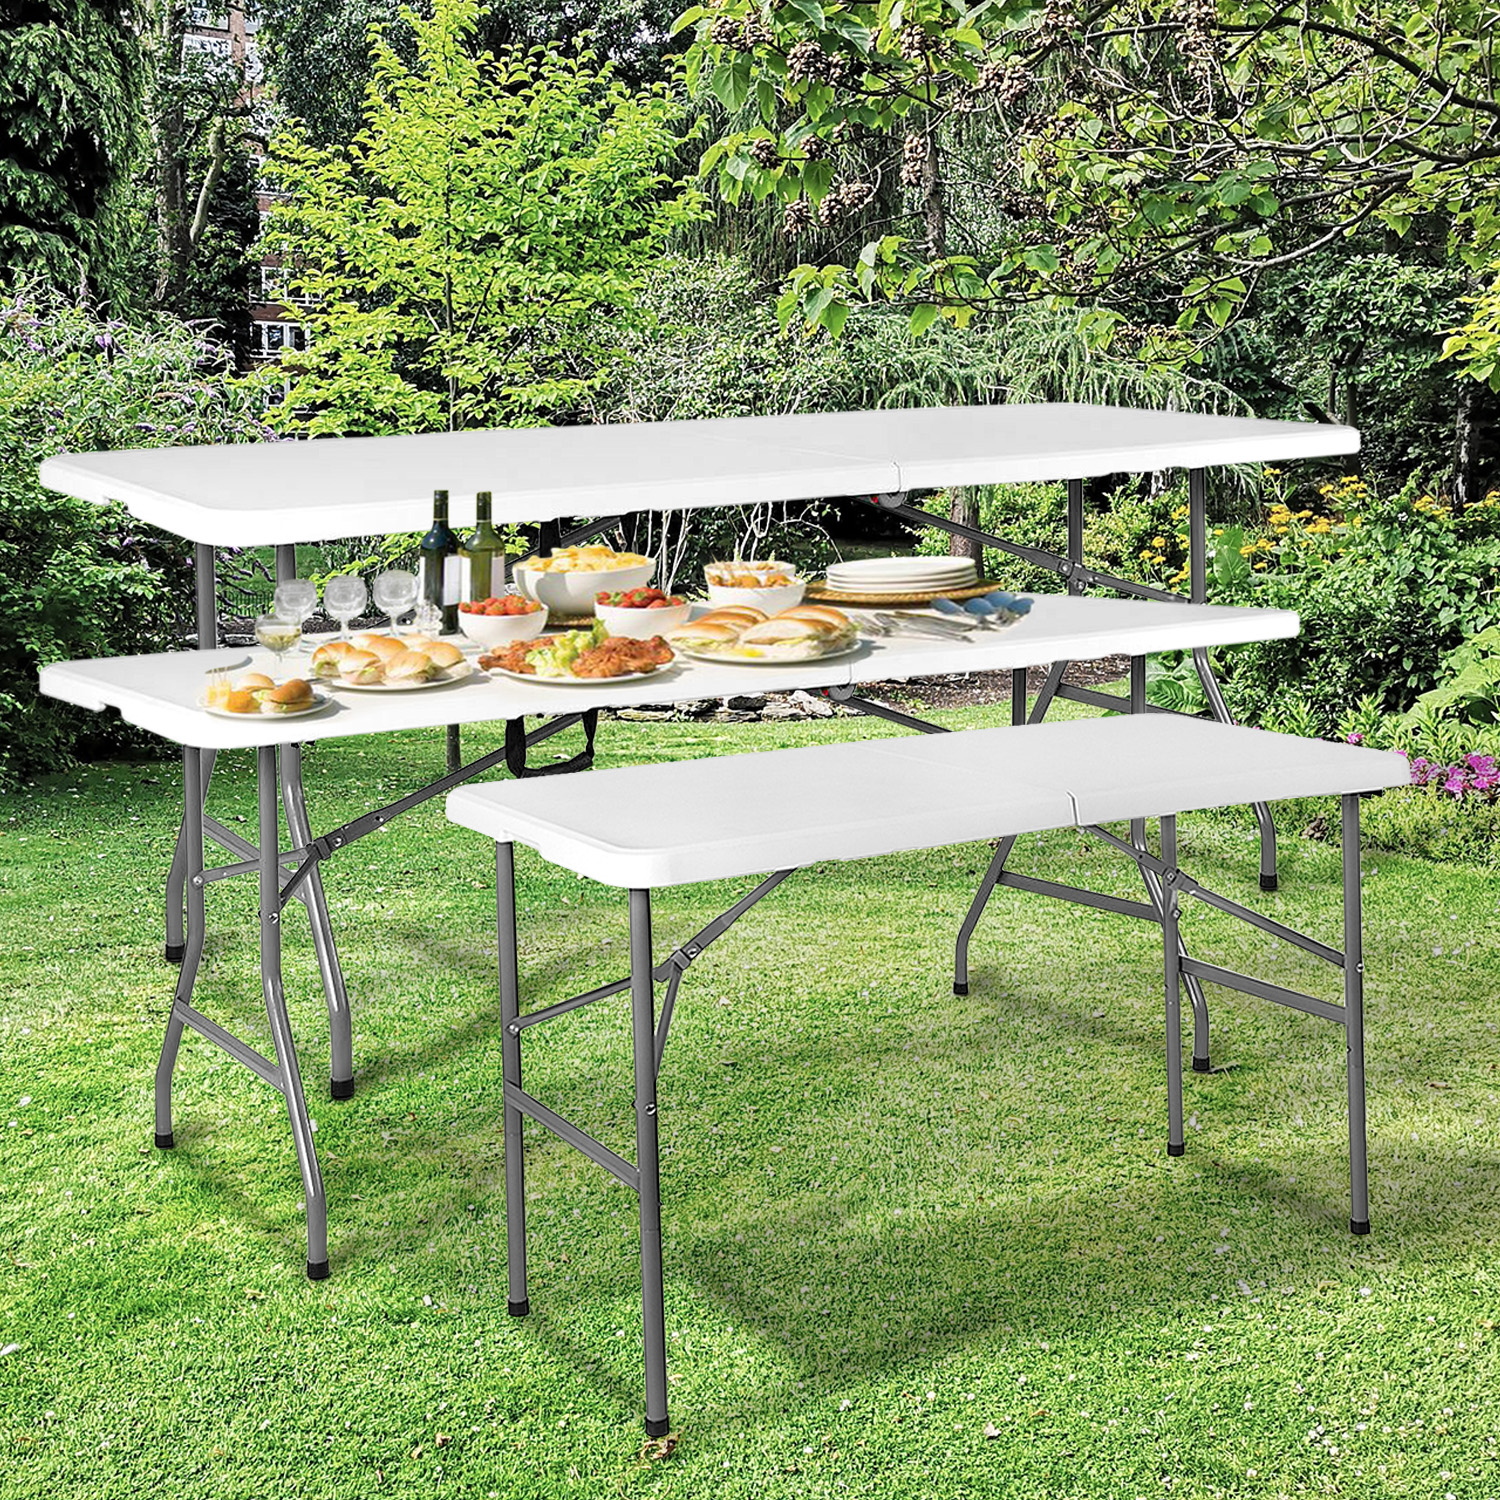 4FT or 5FT Catering Camping Heavy Duty Folding Trestle Table Picnic BBQ Party 